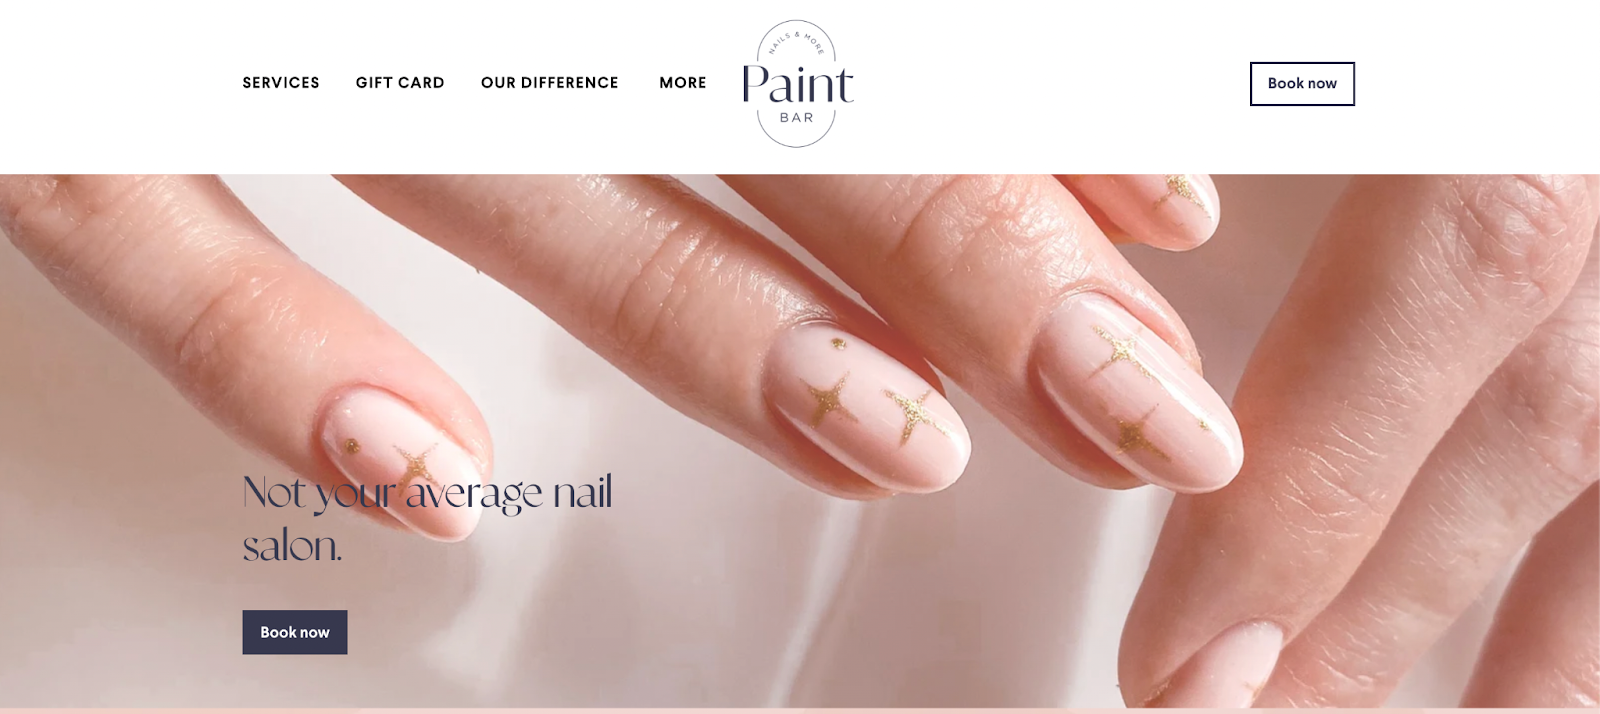 Best nail salon websites, example from Paint Bar.